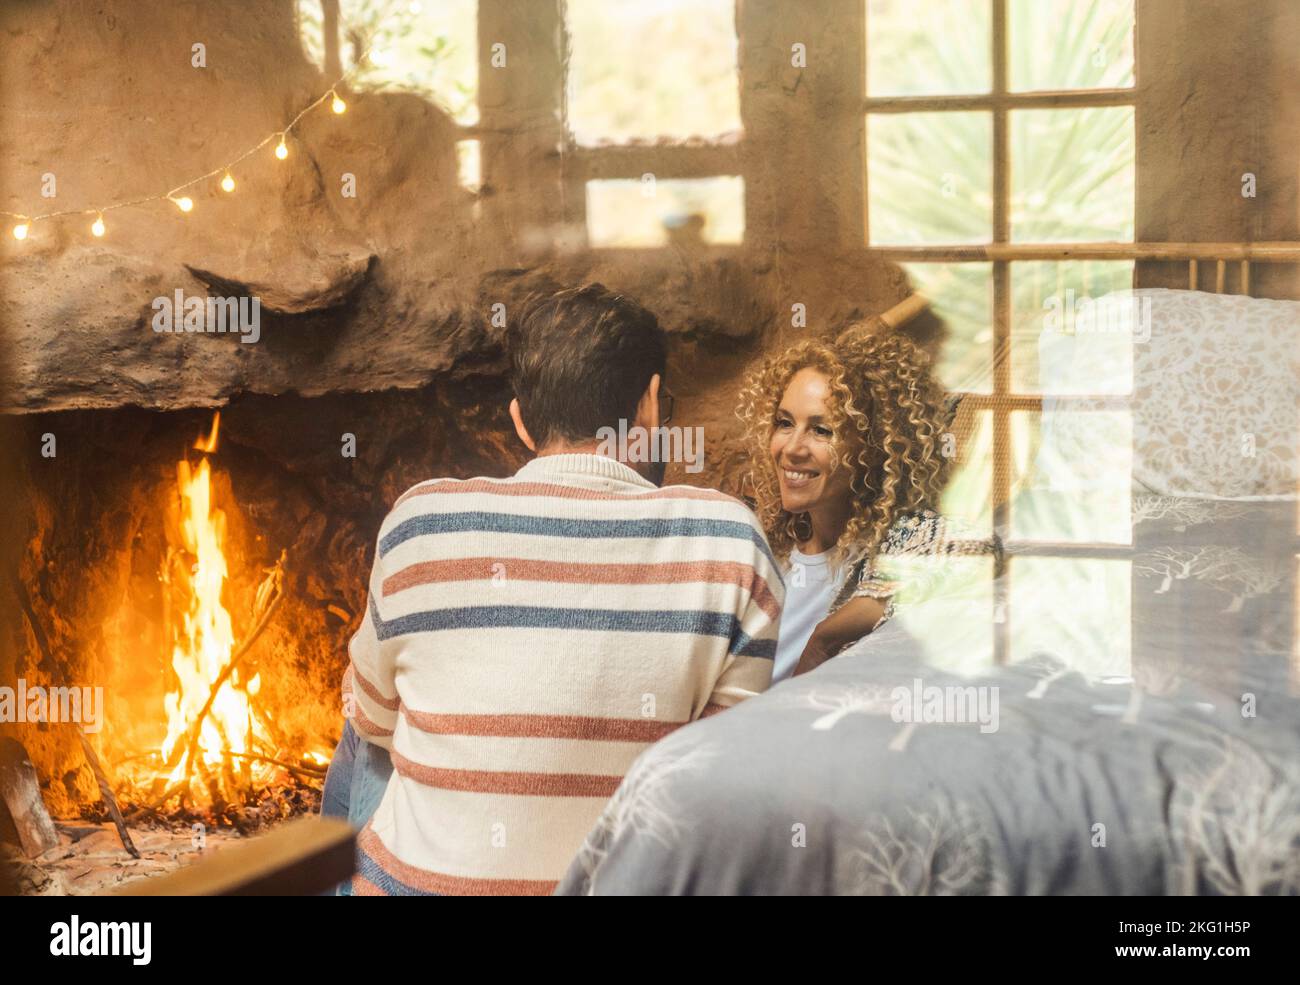 One couple man and woman enjoy leisure indoor activity sitting in front of a warm fireplace to heat home. Happy young mature people view through a gla Stock Photo